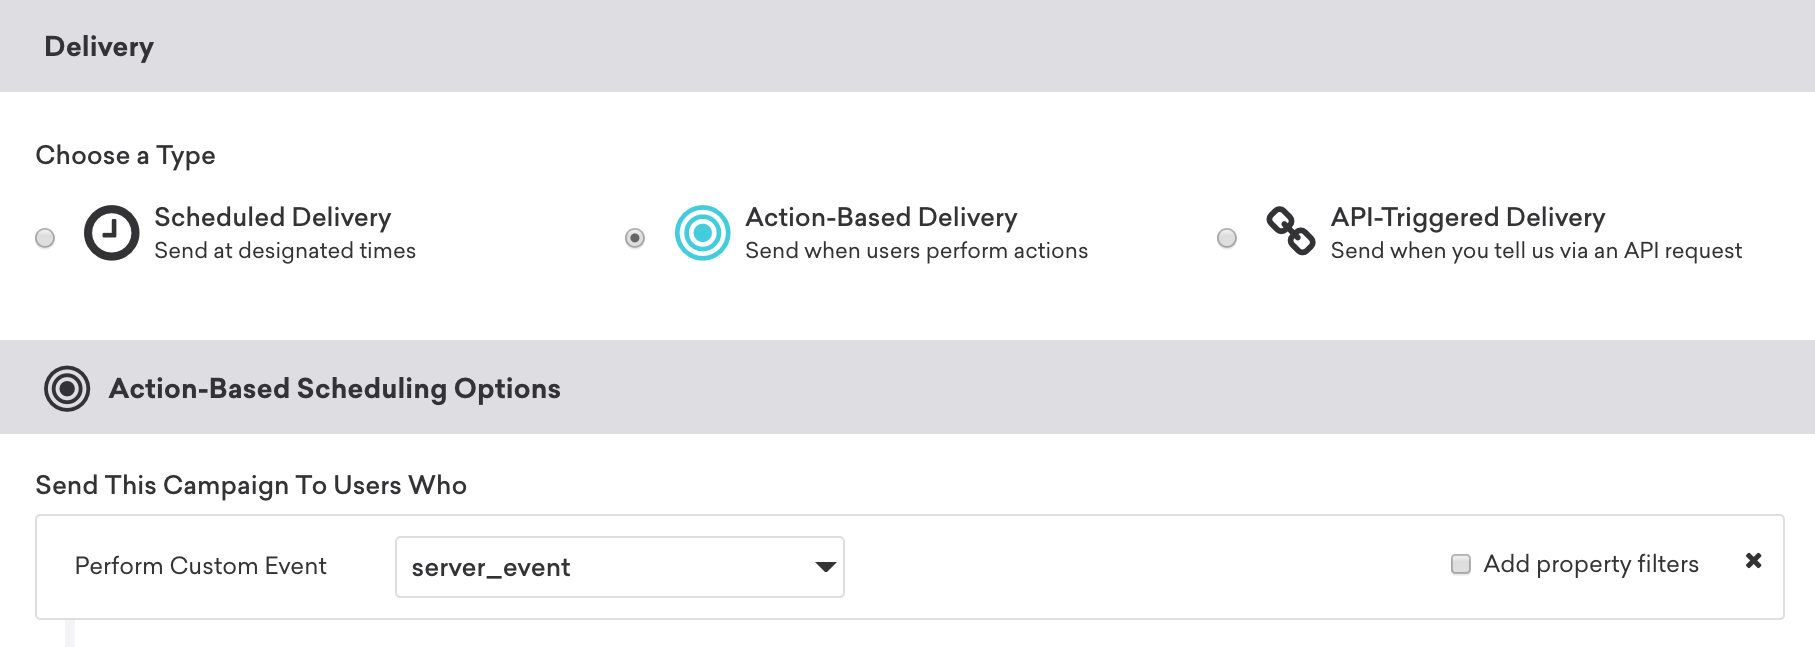 An action-based delivery in-app message campaign that will be delivered to users who perform the custom event "server_event".